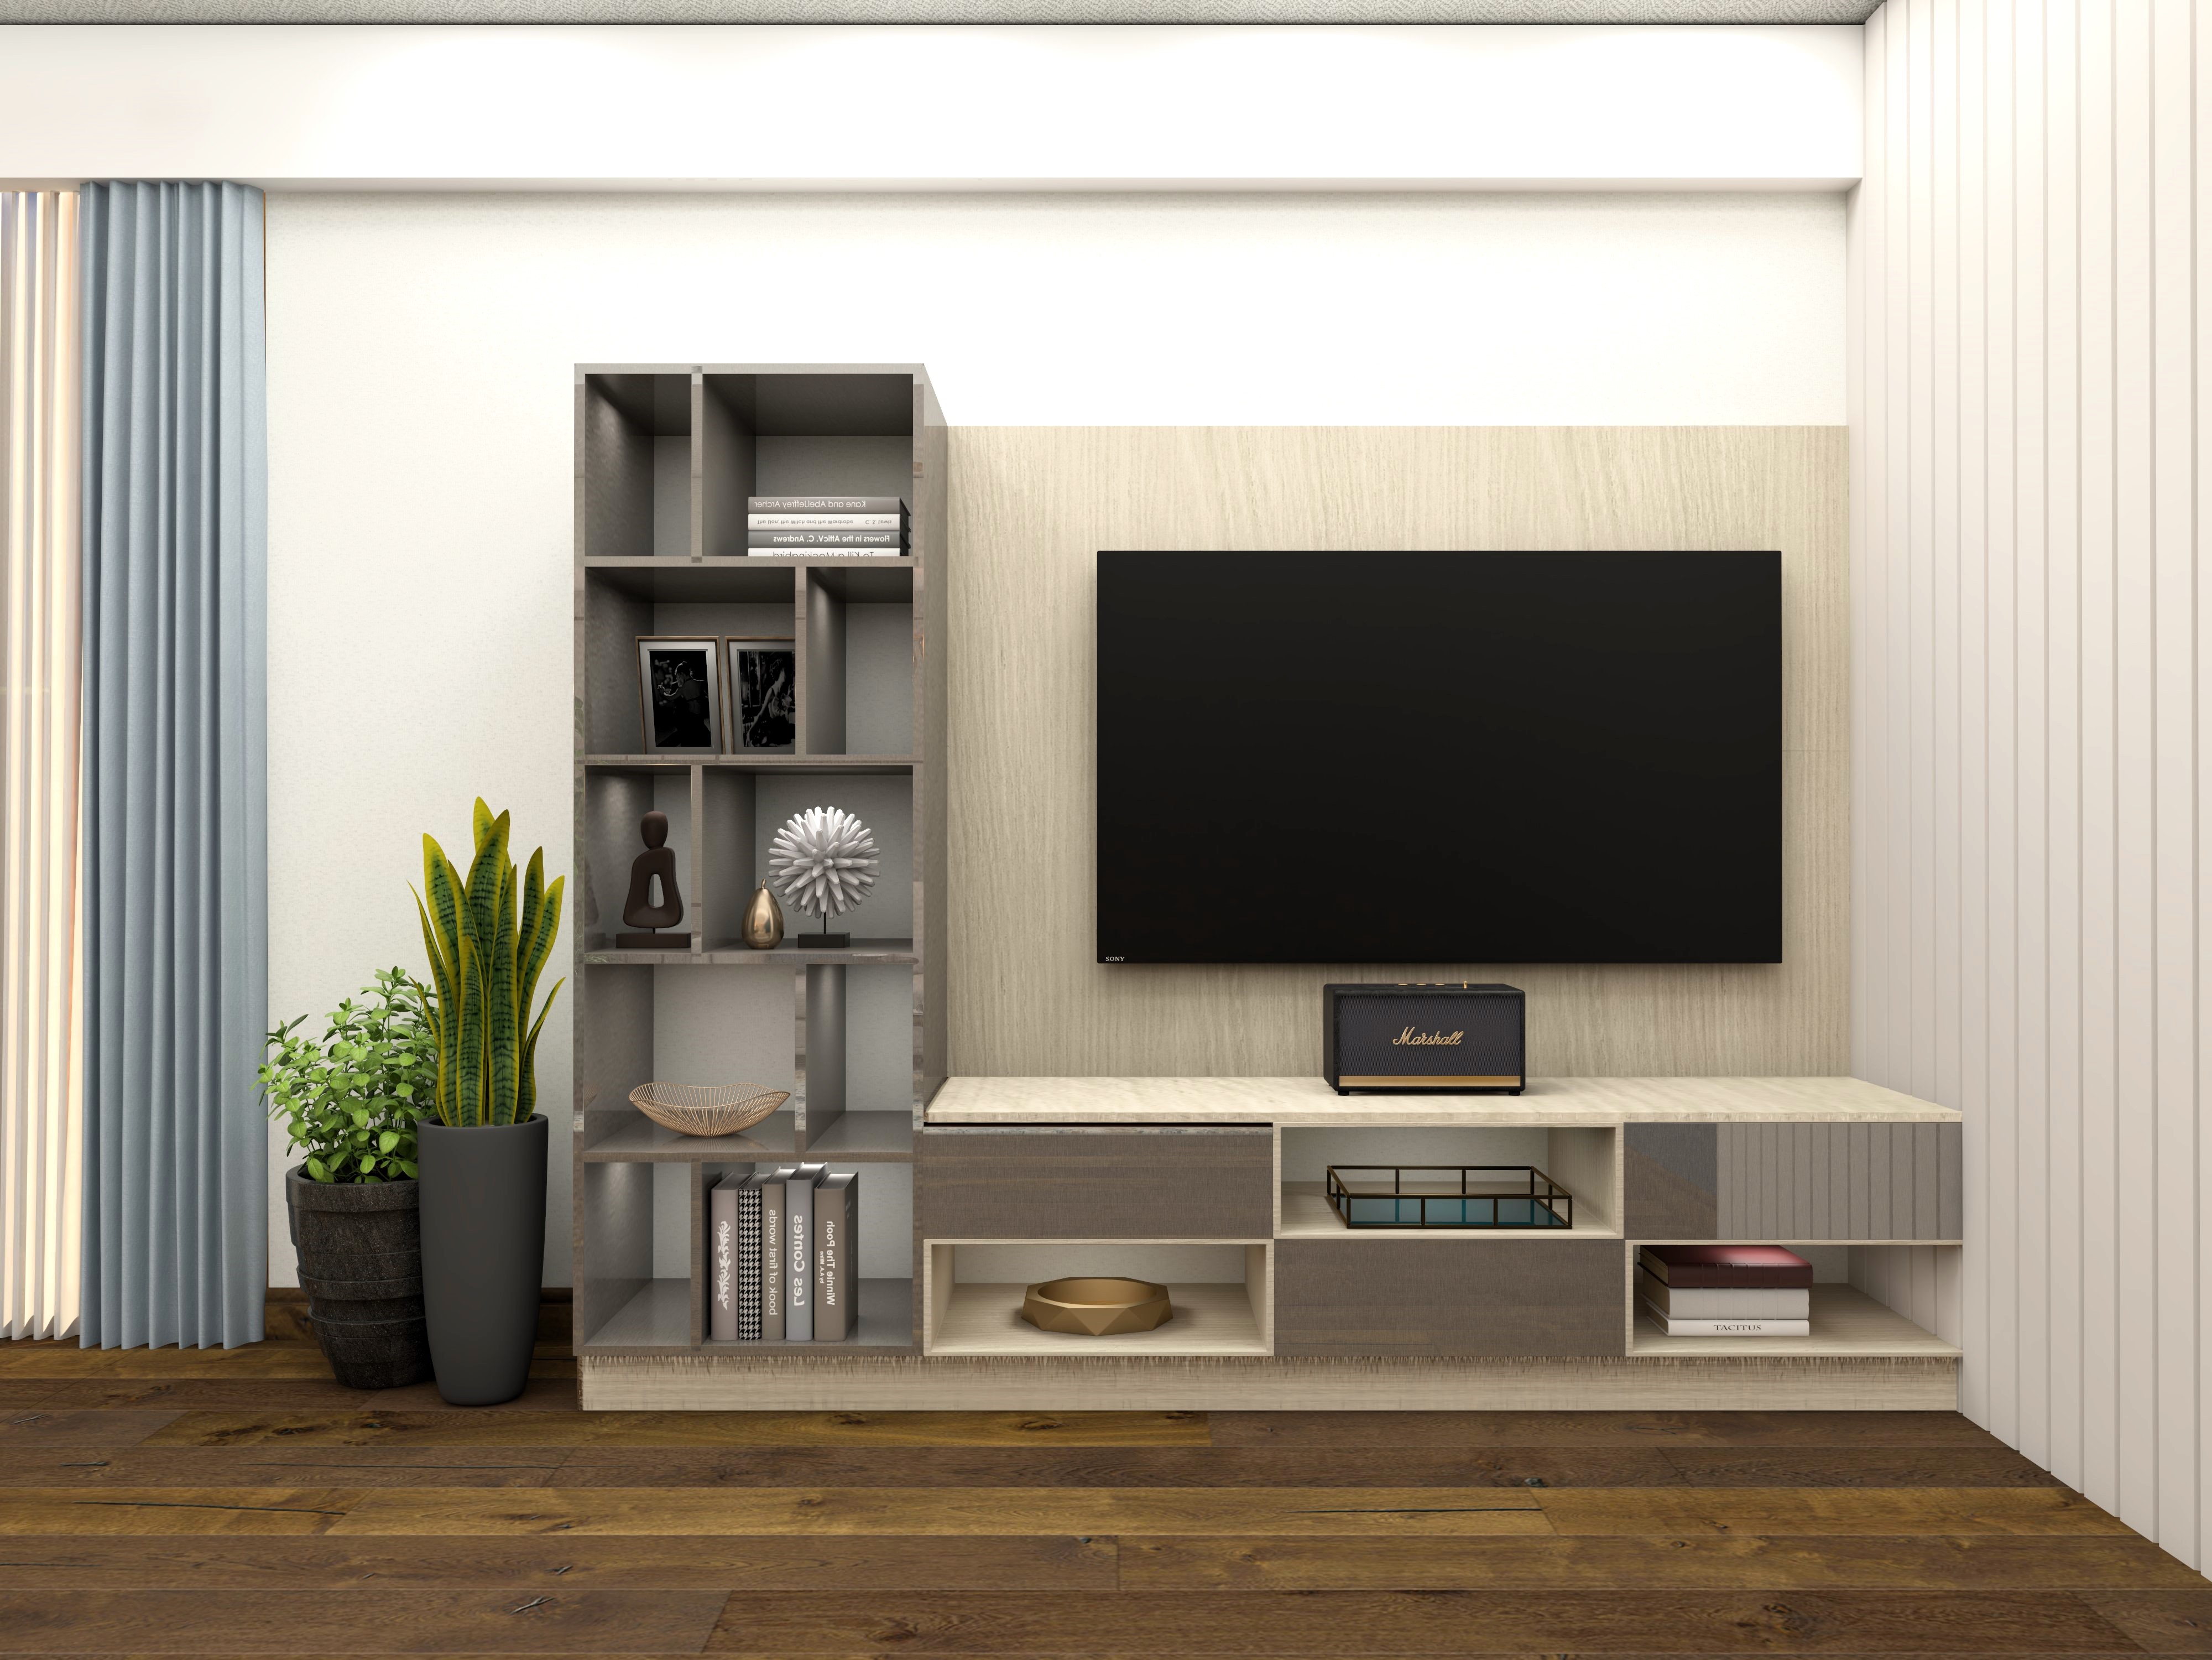 Simple TV unit with built-in shelves and drawers-Beautiful Homes